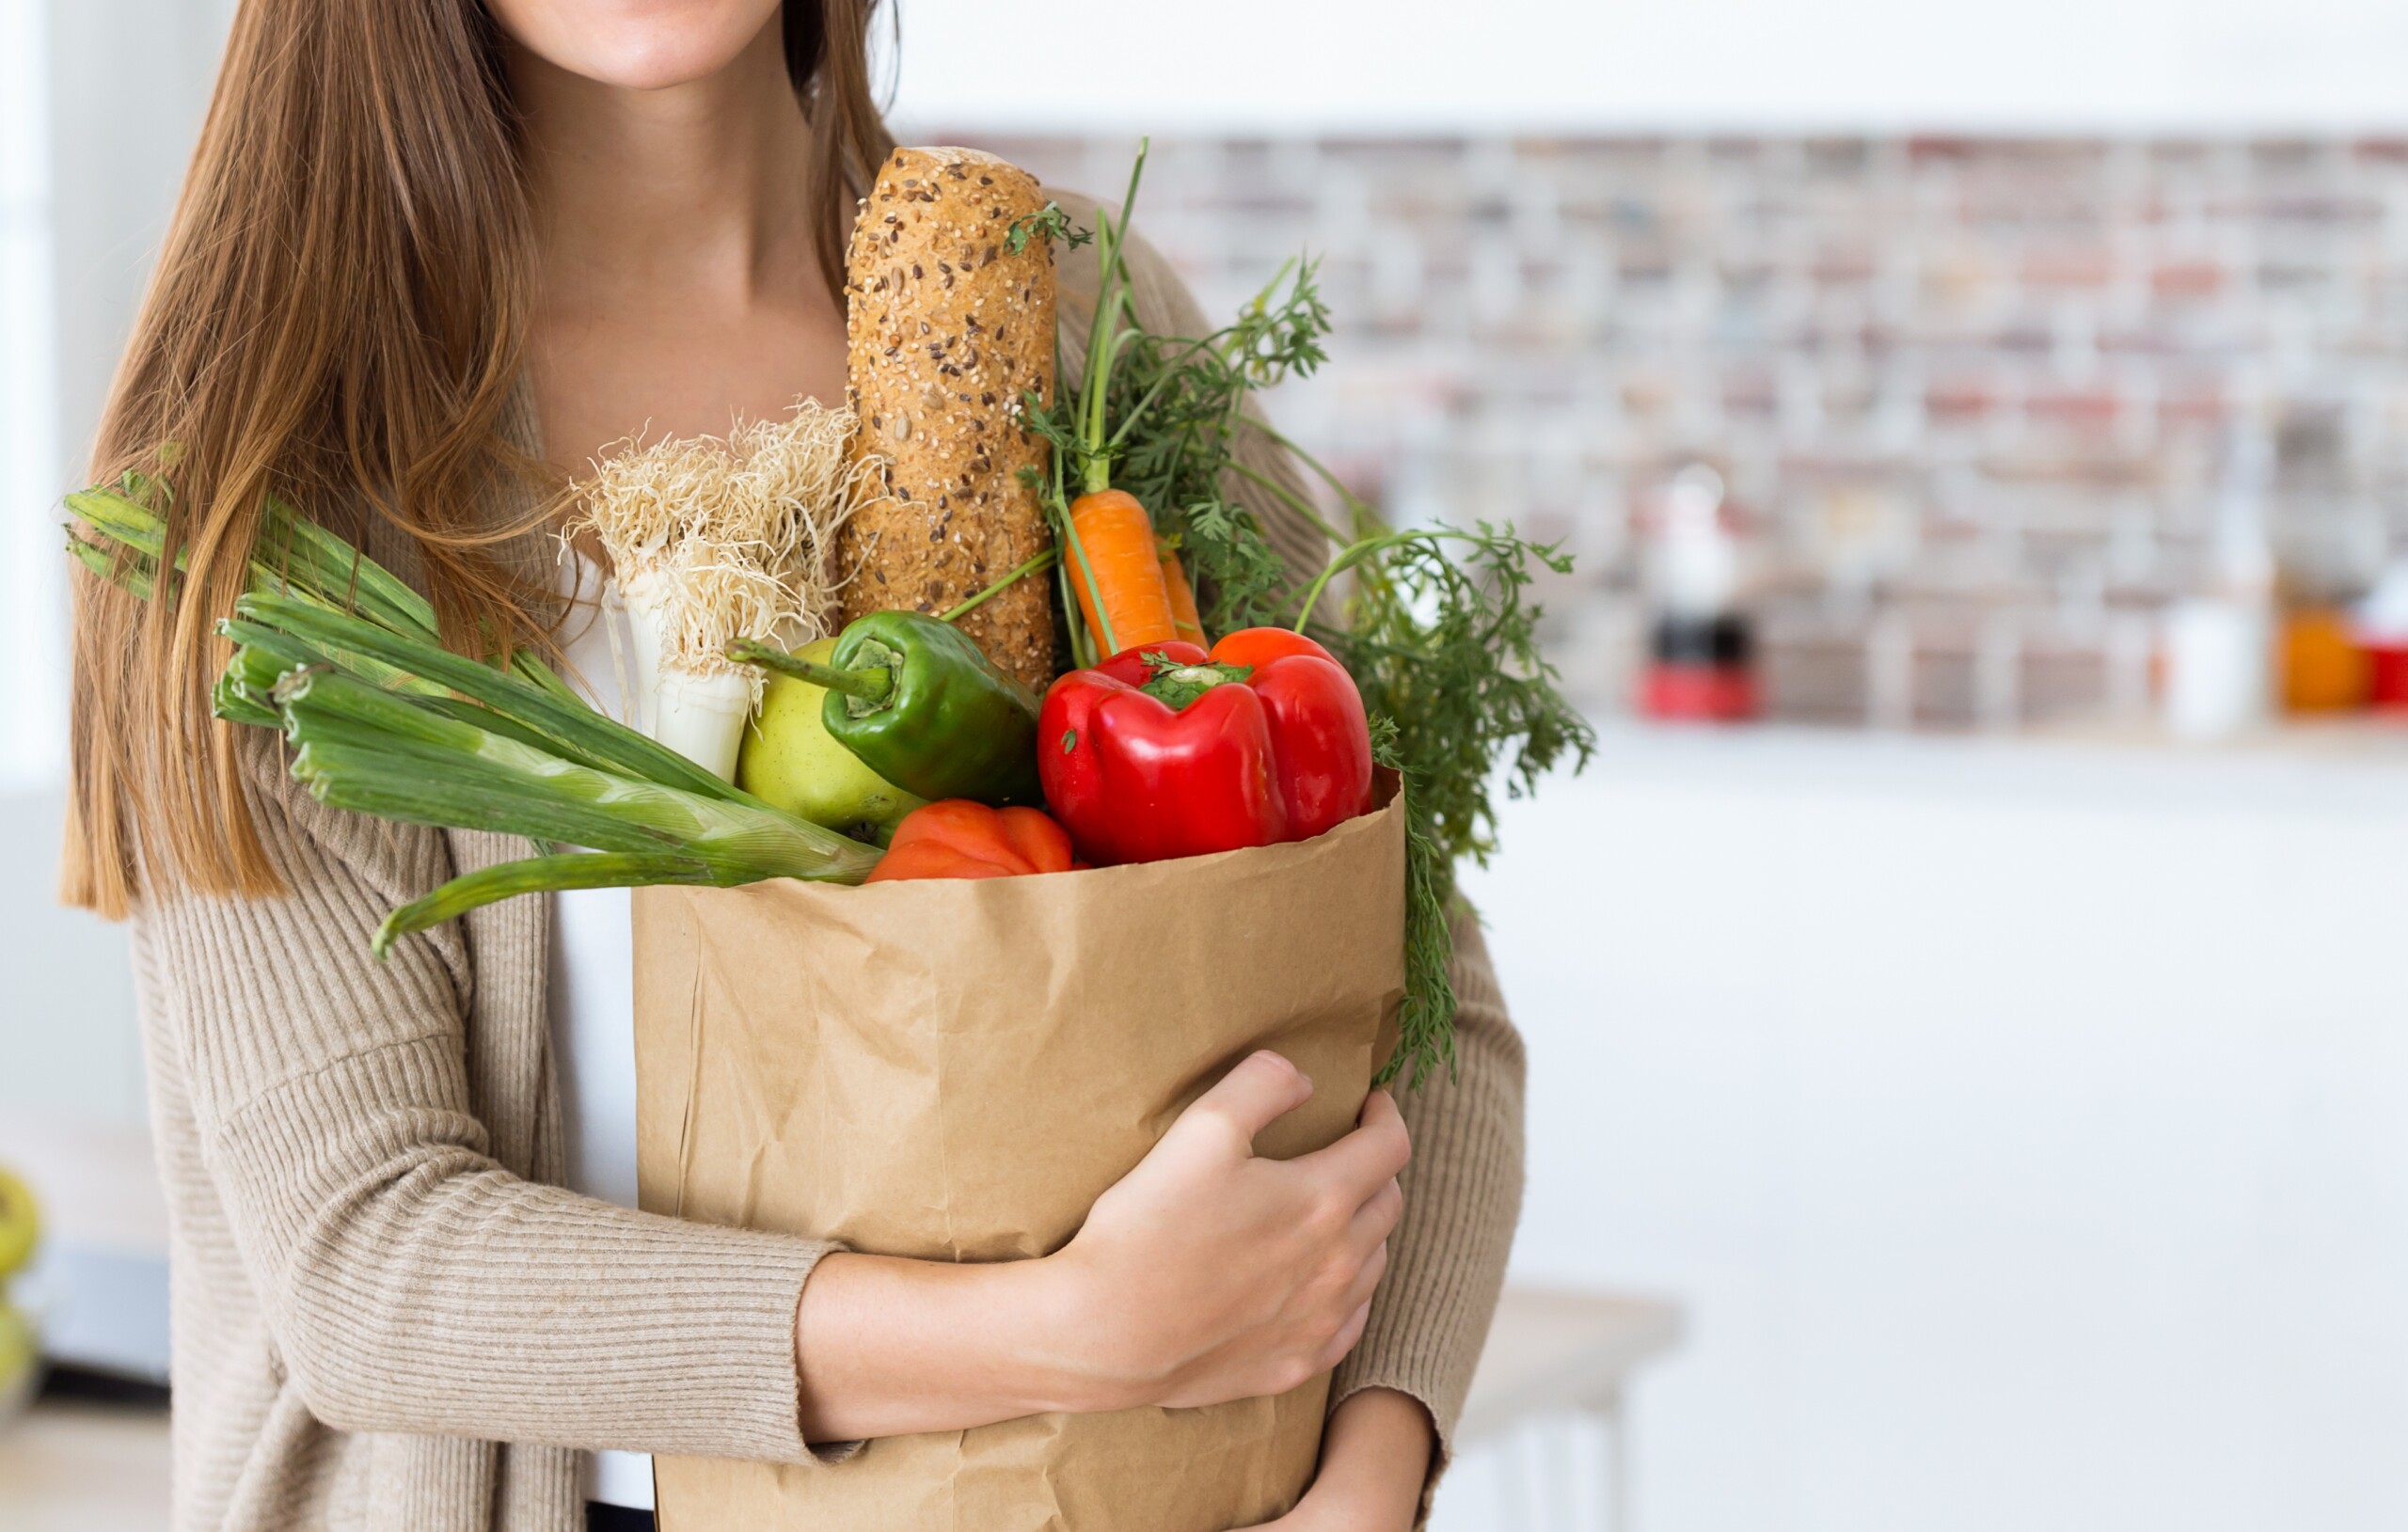 Why Your Heart Races when Carrying Groceries into the House